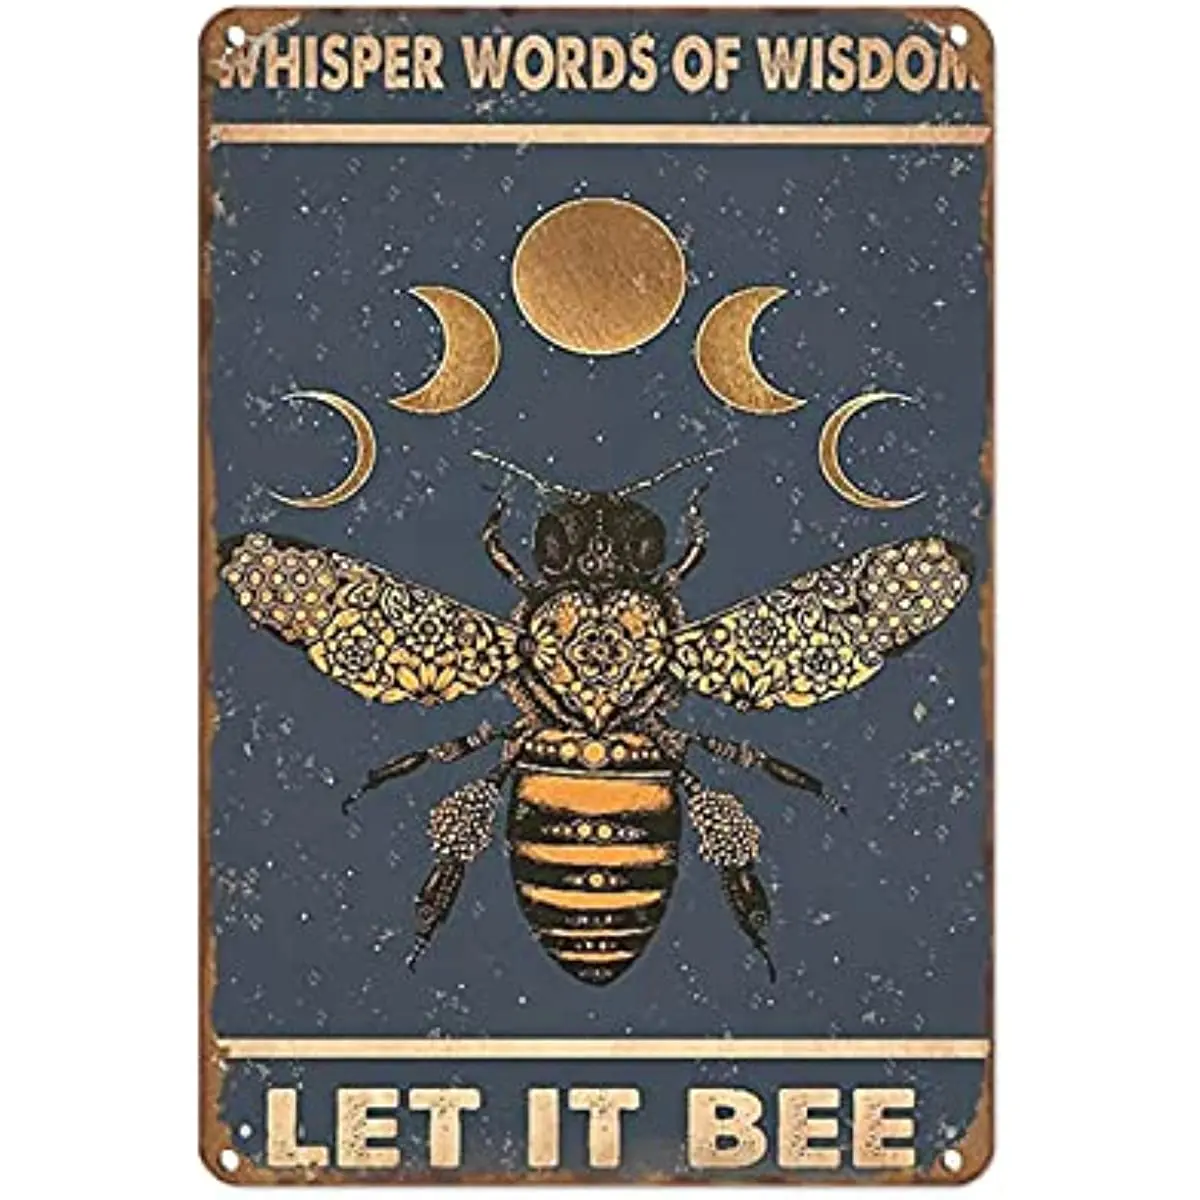 

Metal Tin Sign Vintage Whisper Words Wisdom Let It Be Bees Bee Lover Bumble Bees Artwork Hot Desserts for Home, Living Room